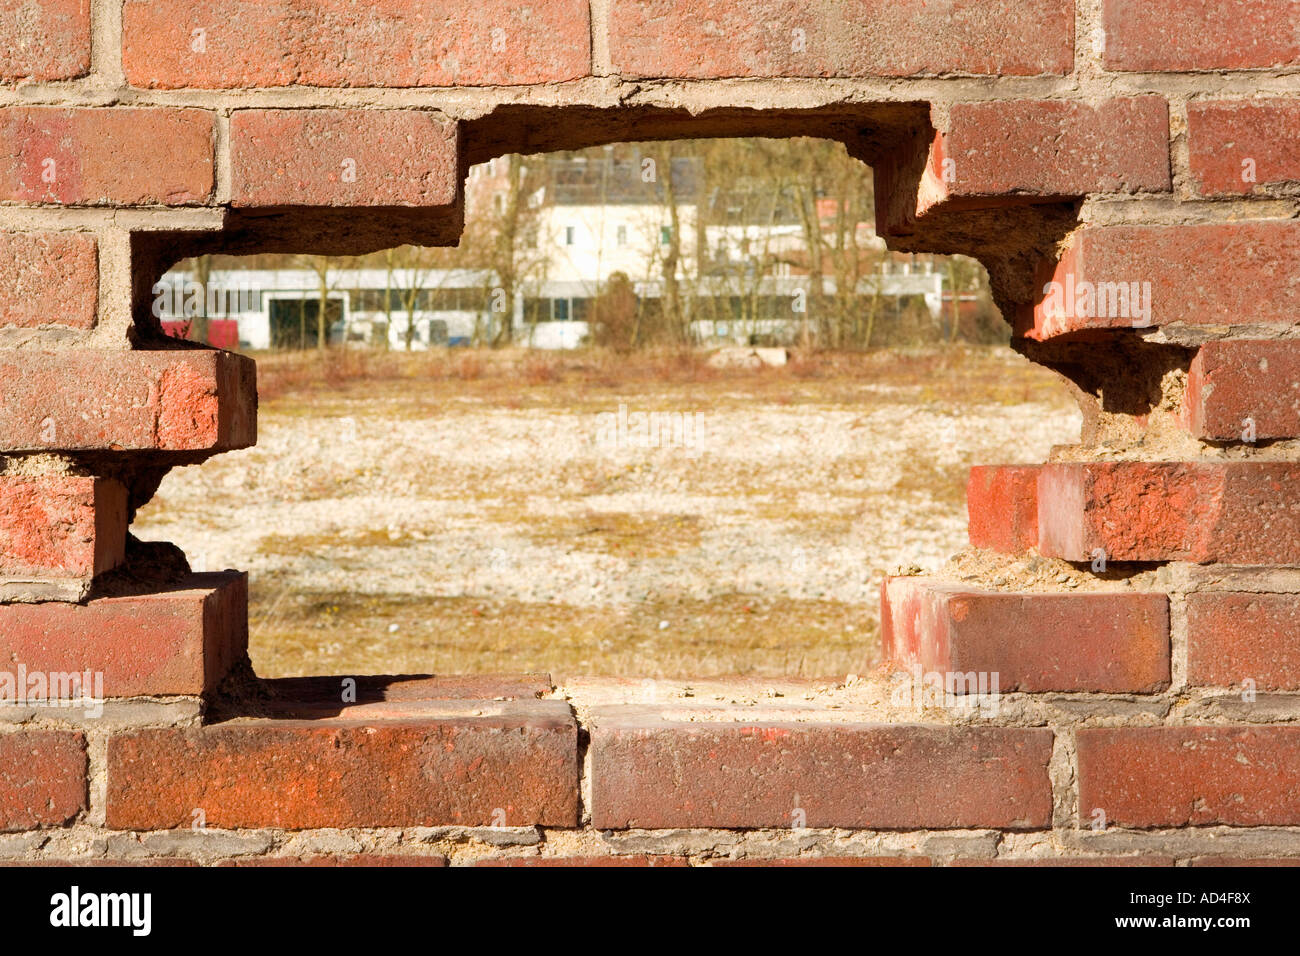 A hole in a brick wall Stock Photo